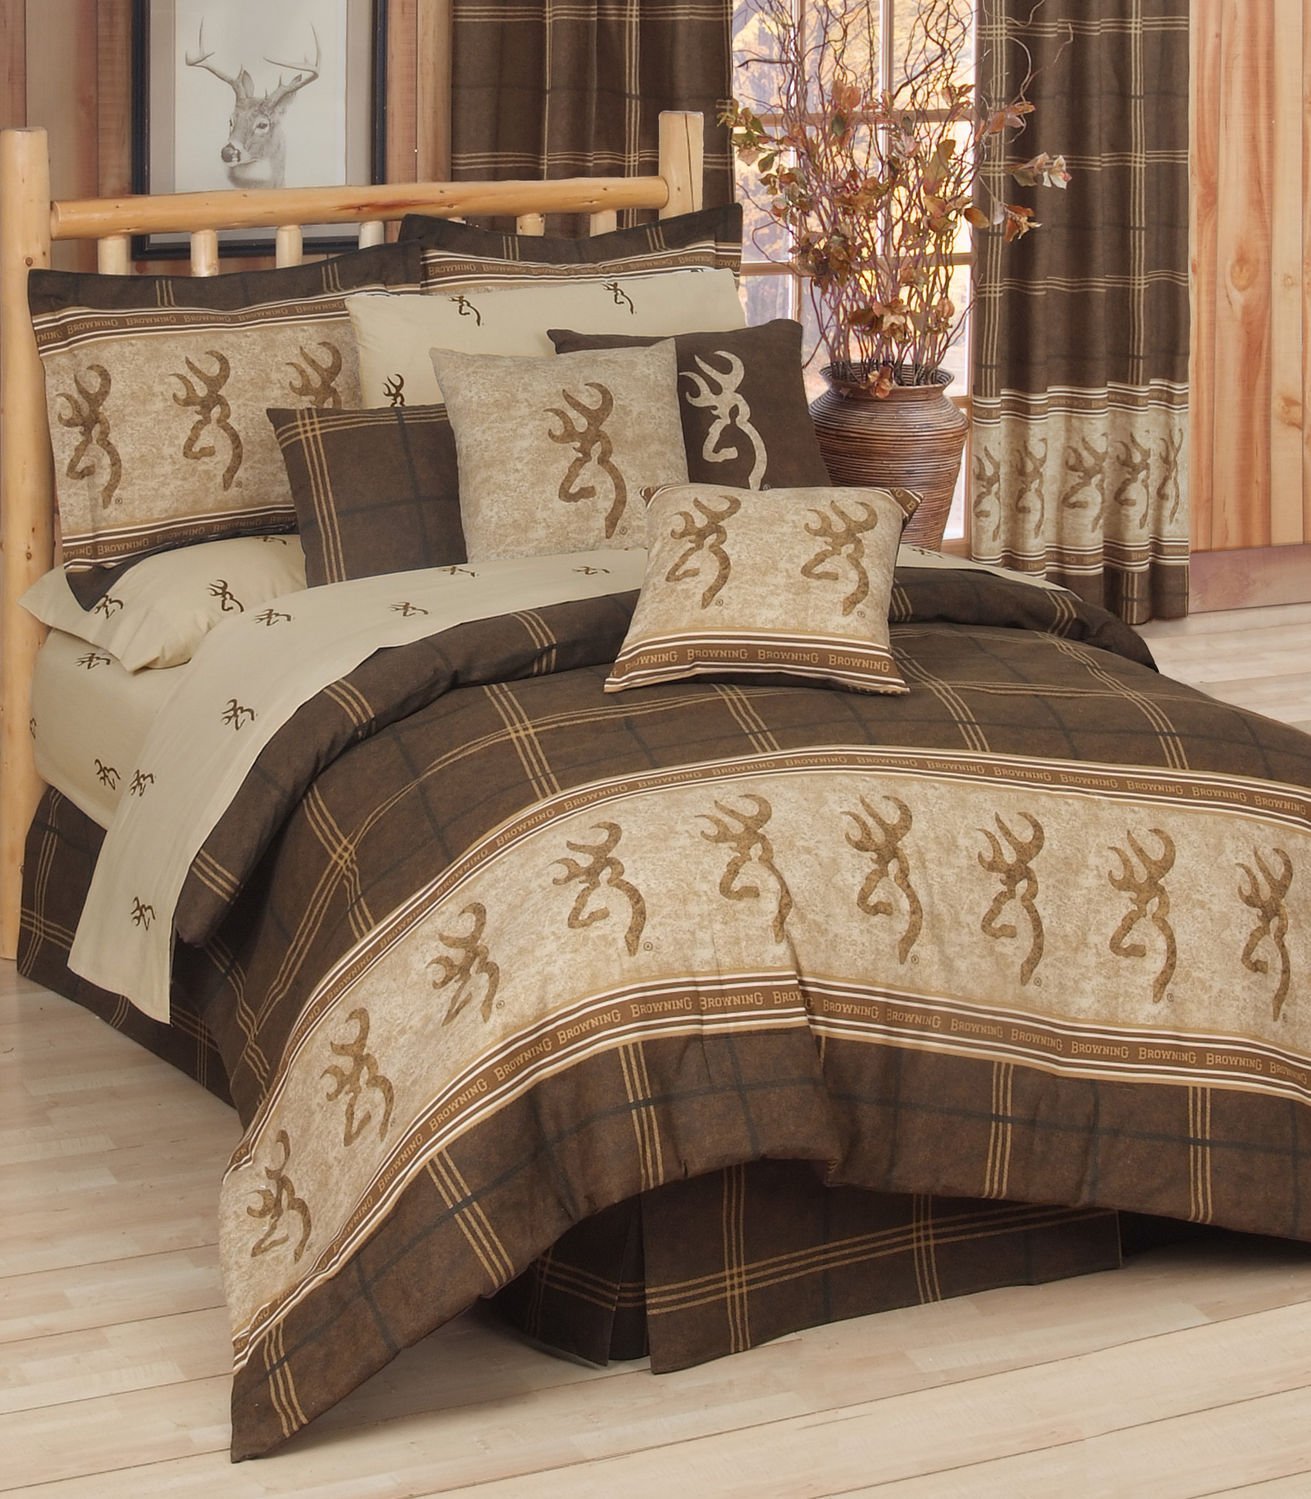 Rustic Whitetail Deer Bedding and Curtains